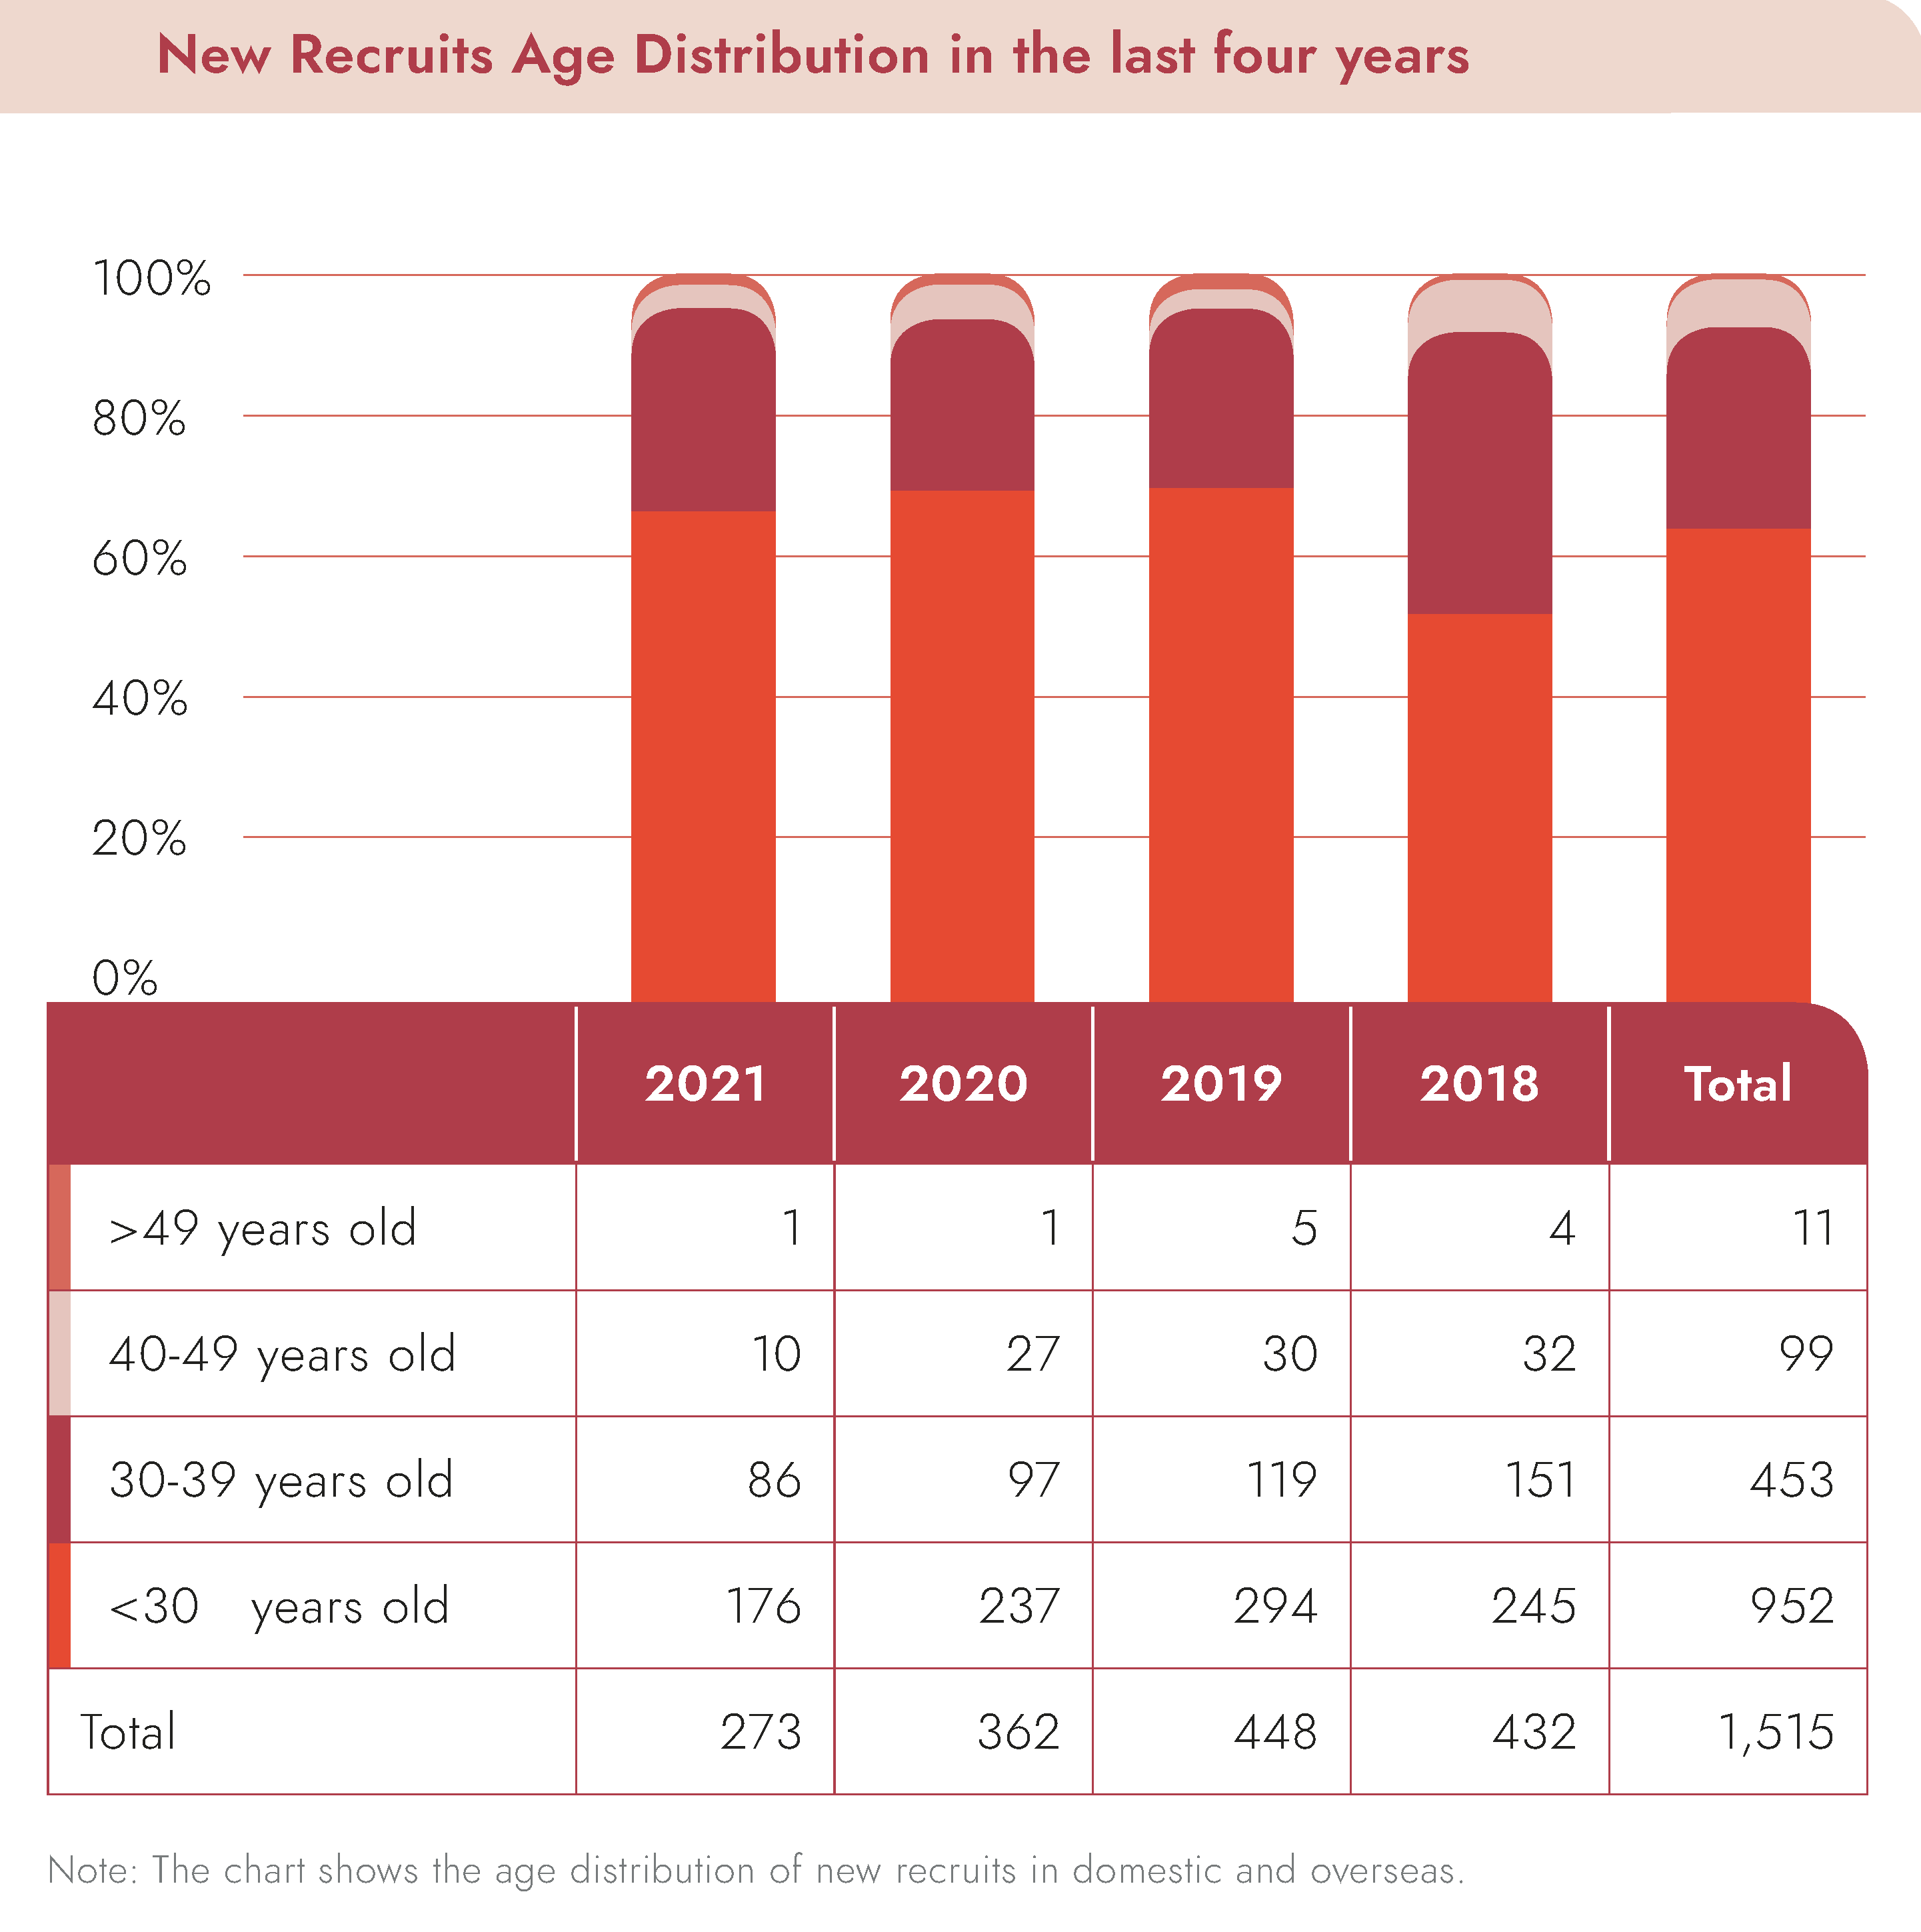 New Recruits Age Distribution in the last four years